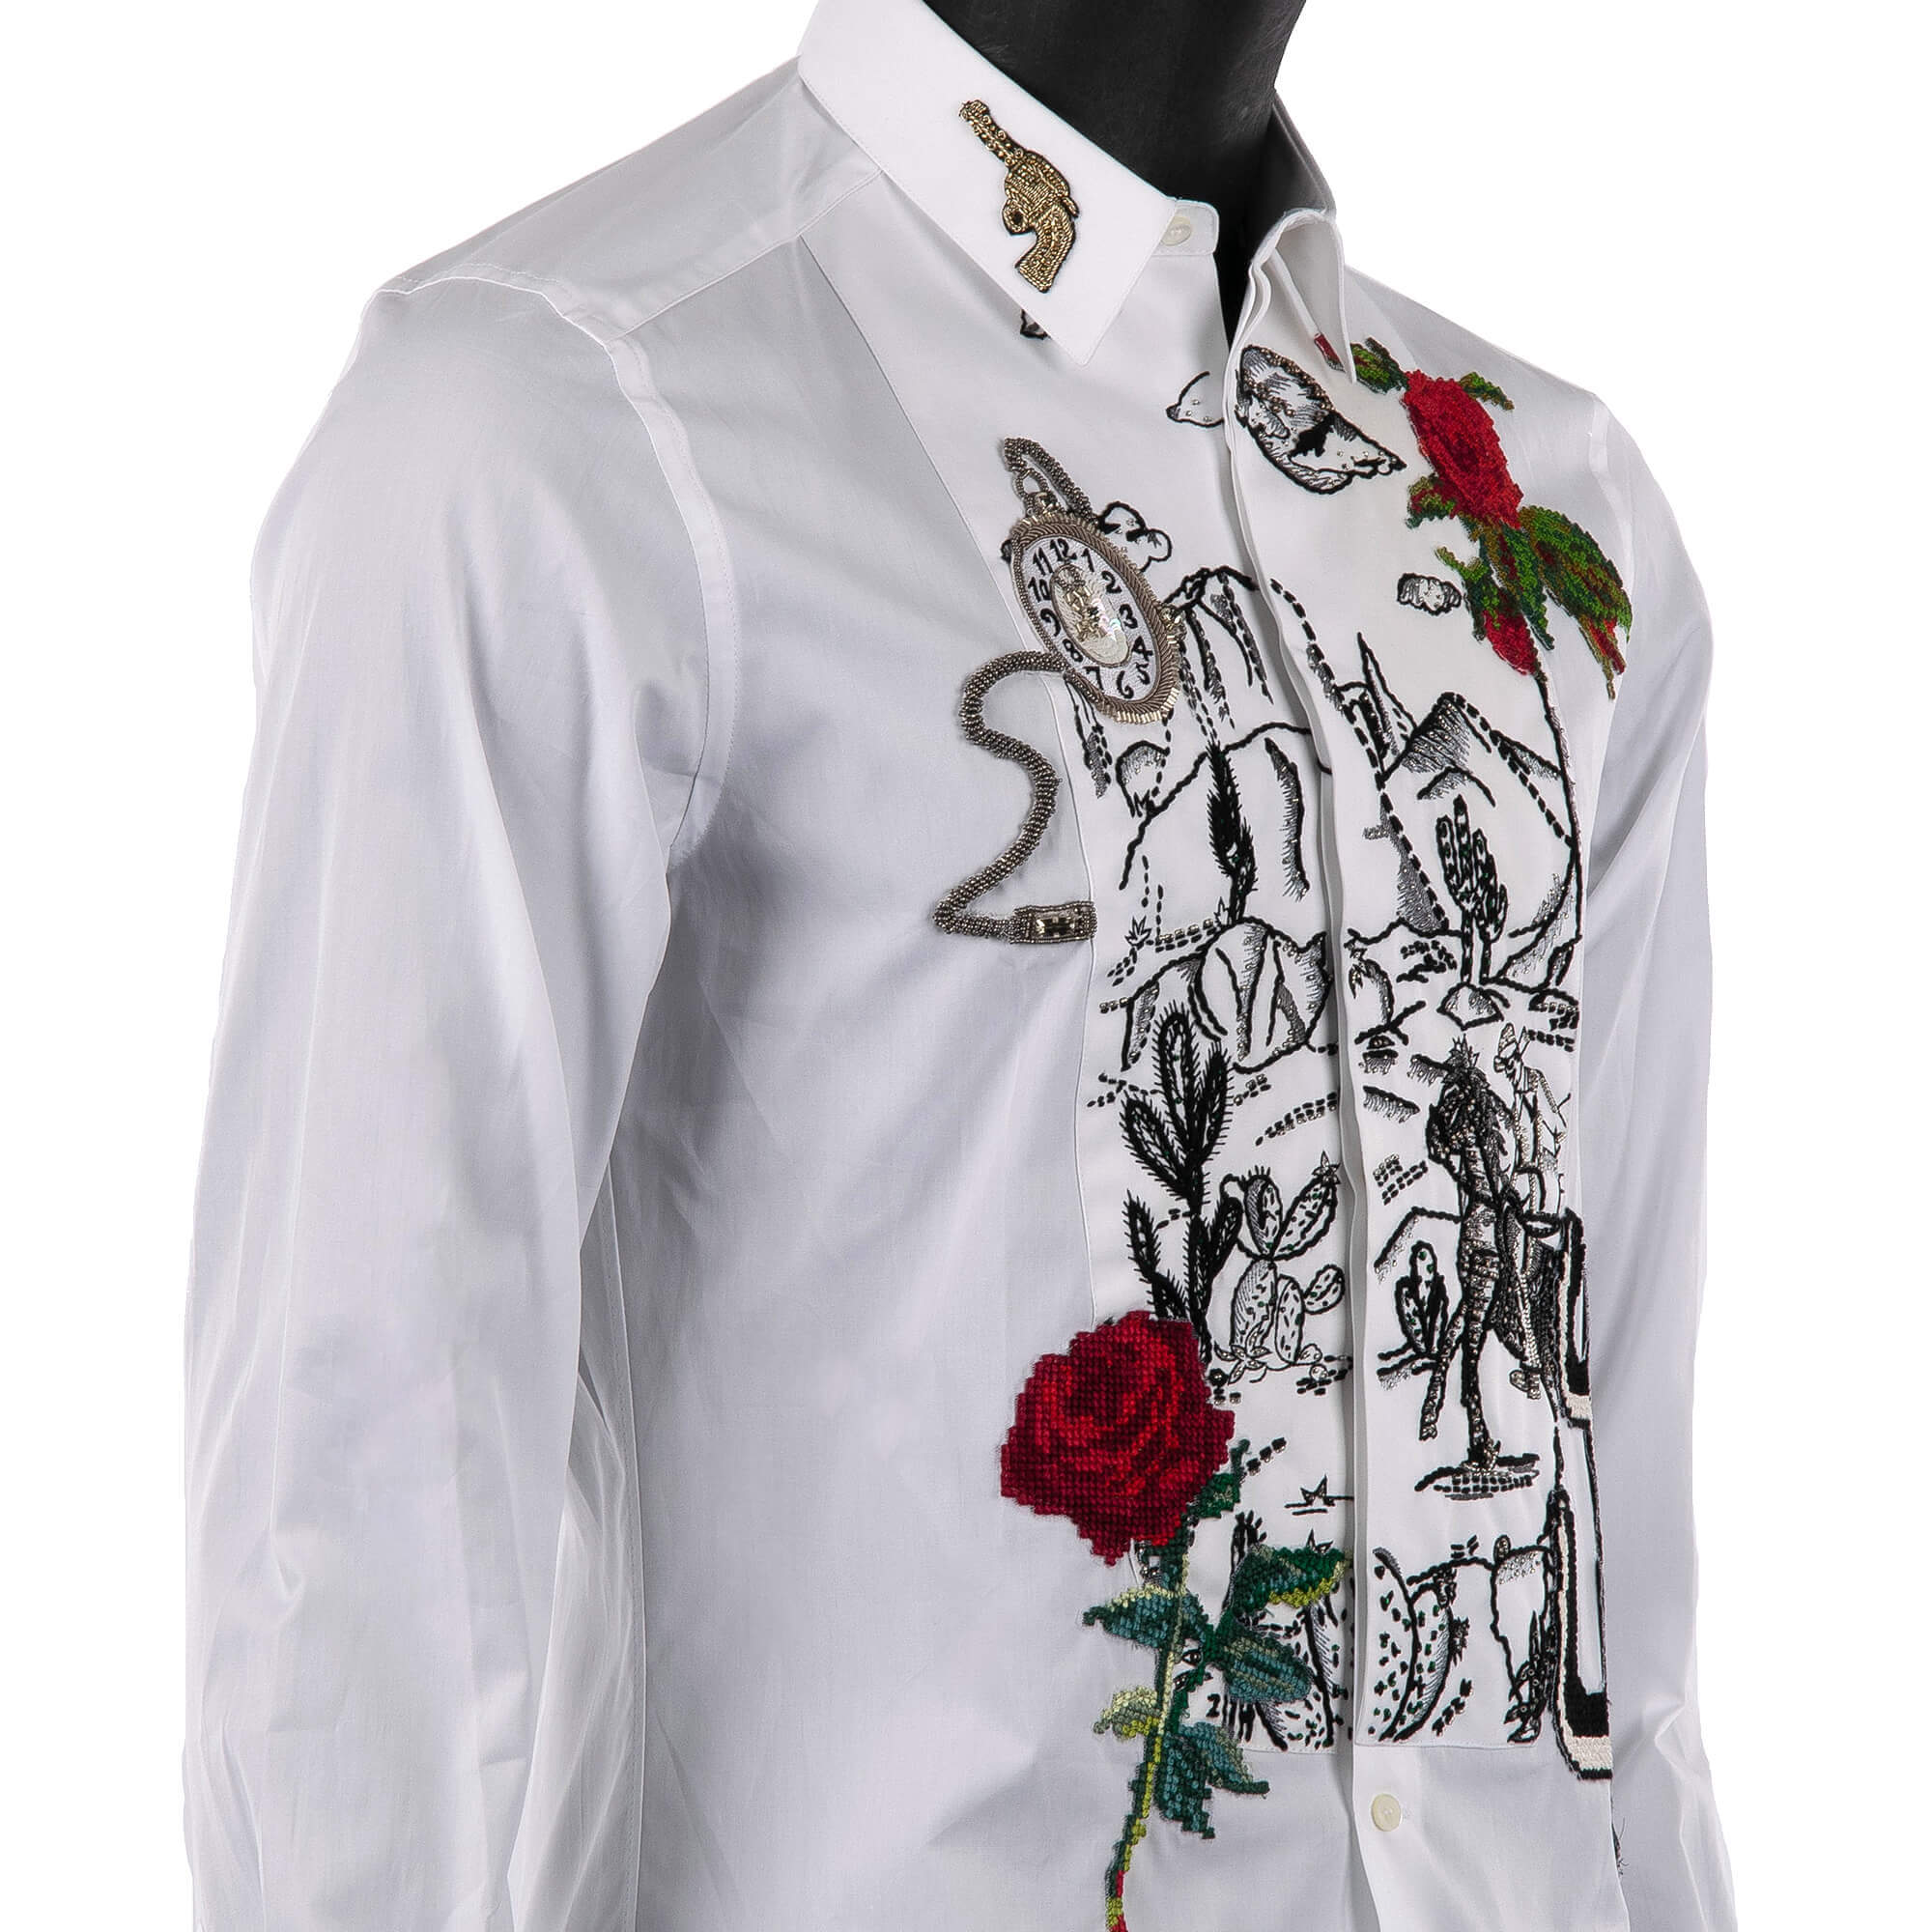 Dolce_Gabbana_Shirt_with_Western_Roses_Embroidery_White_ML7429_5_44_1.jpg